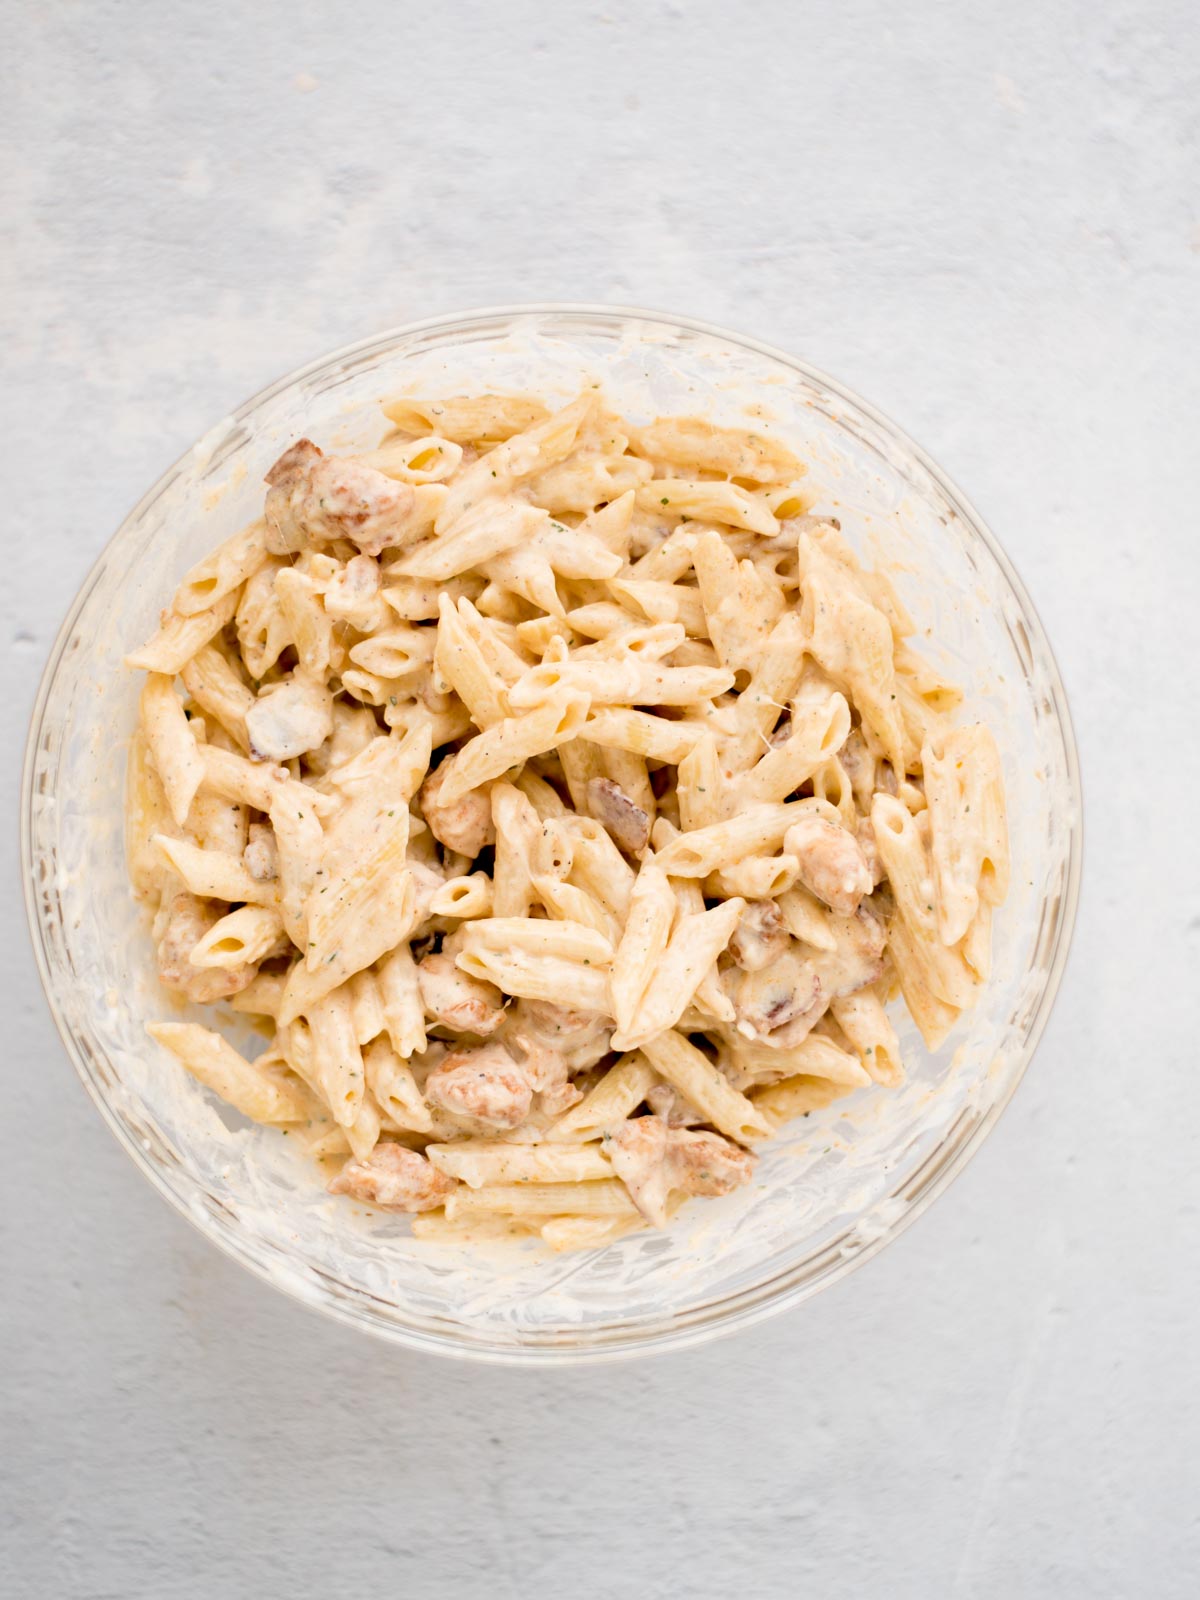 Pasta and cooked chicken pieces coated in white sauce in a mixing bowl.